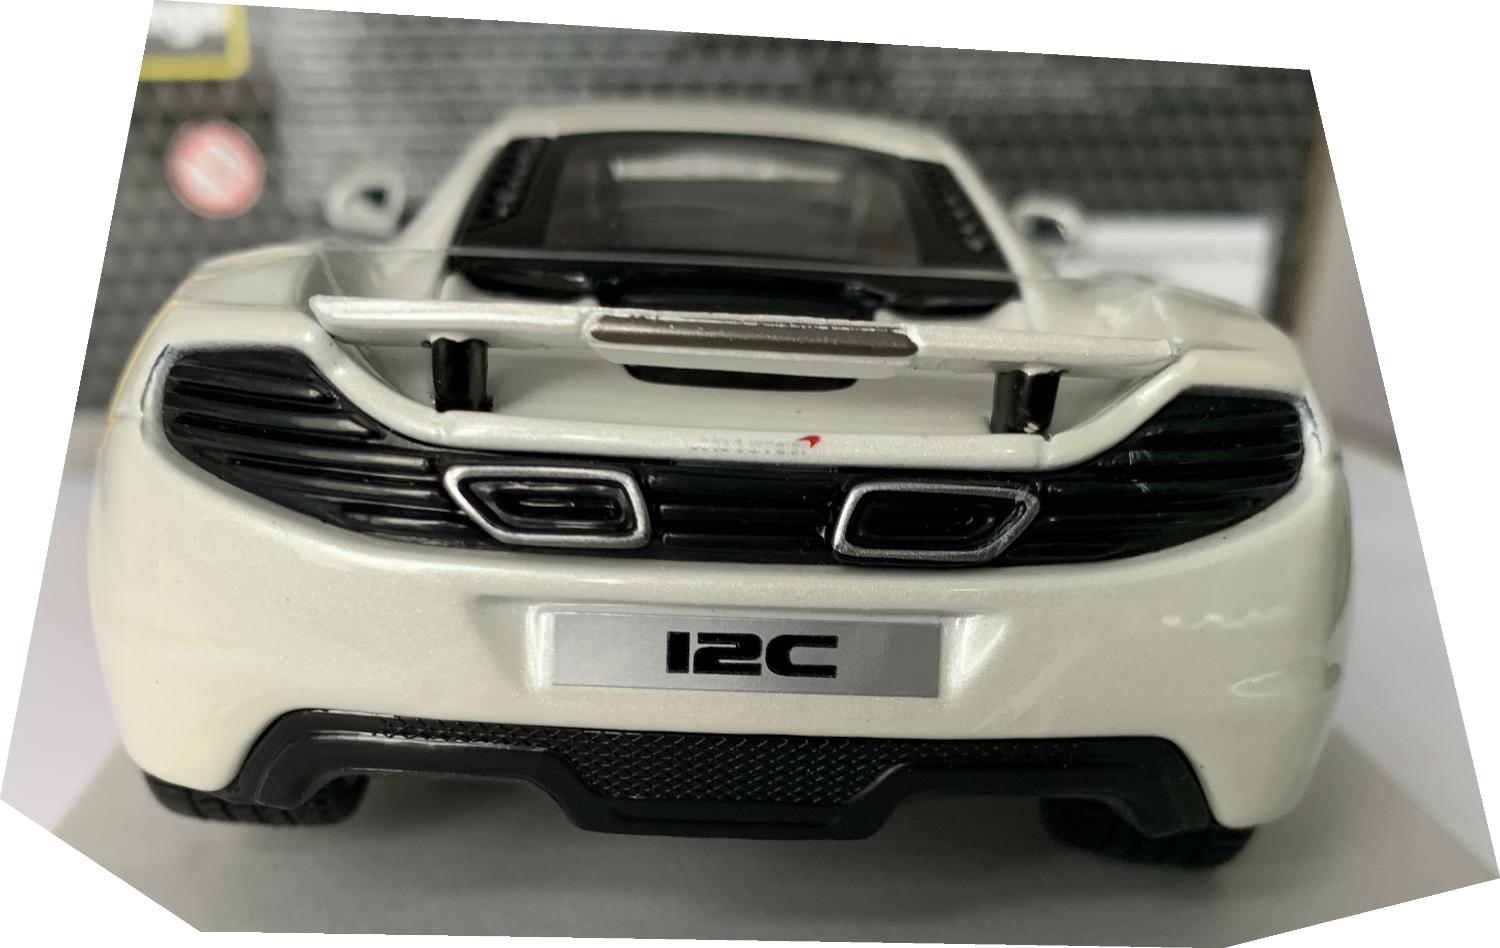 An excellent reproduction of the McLaren 12C with high level of detail throughout, all authentically recreated. The model is presented in a window display box, the car is approx. 18 cm long and the presentation box is 23 cm long